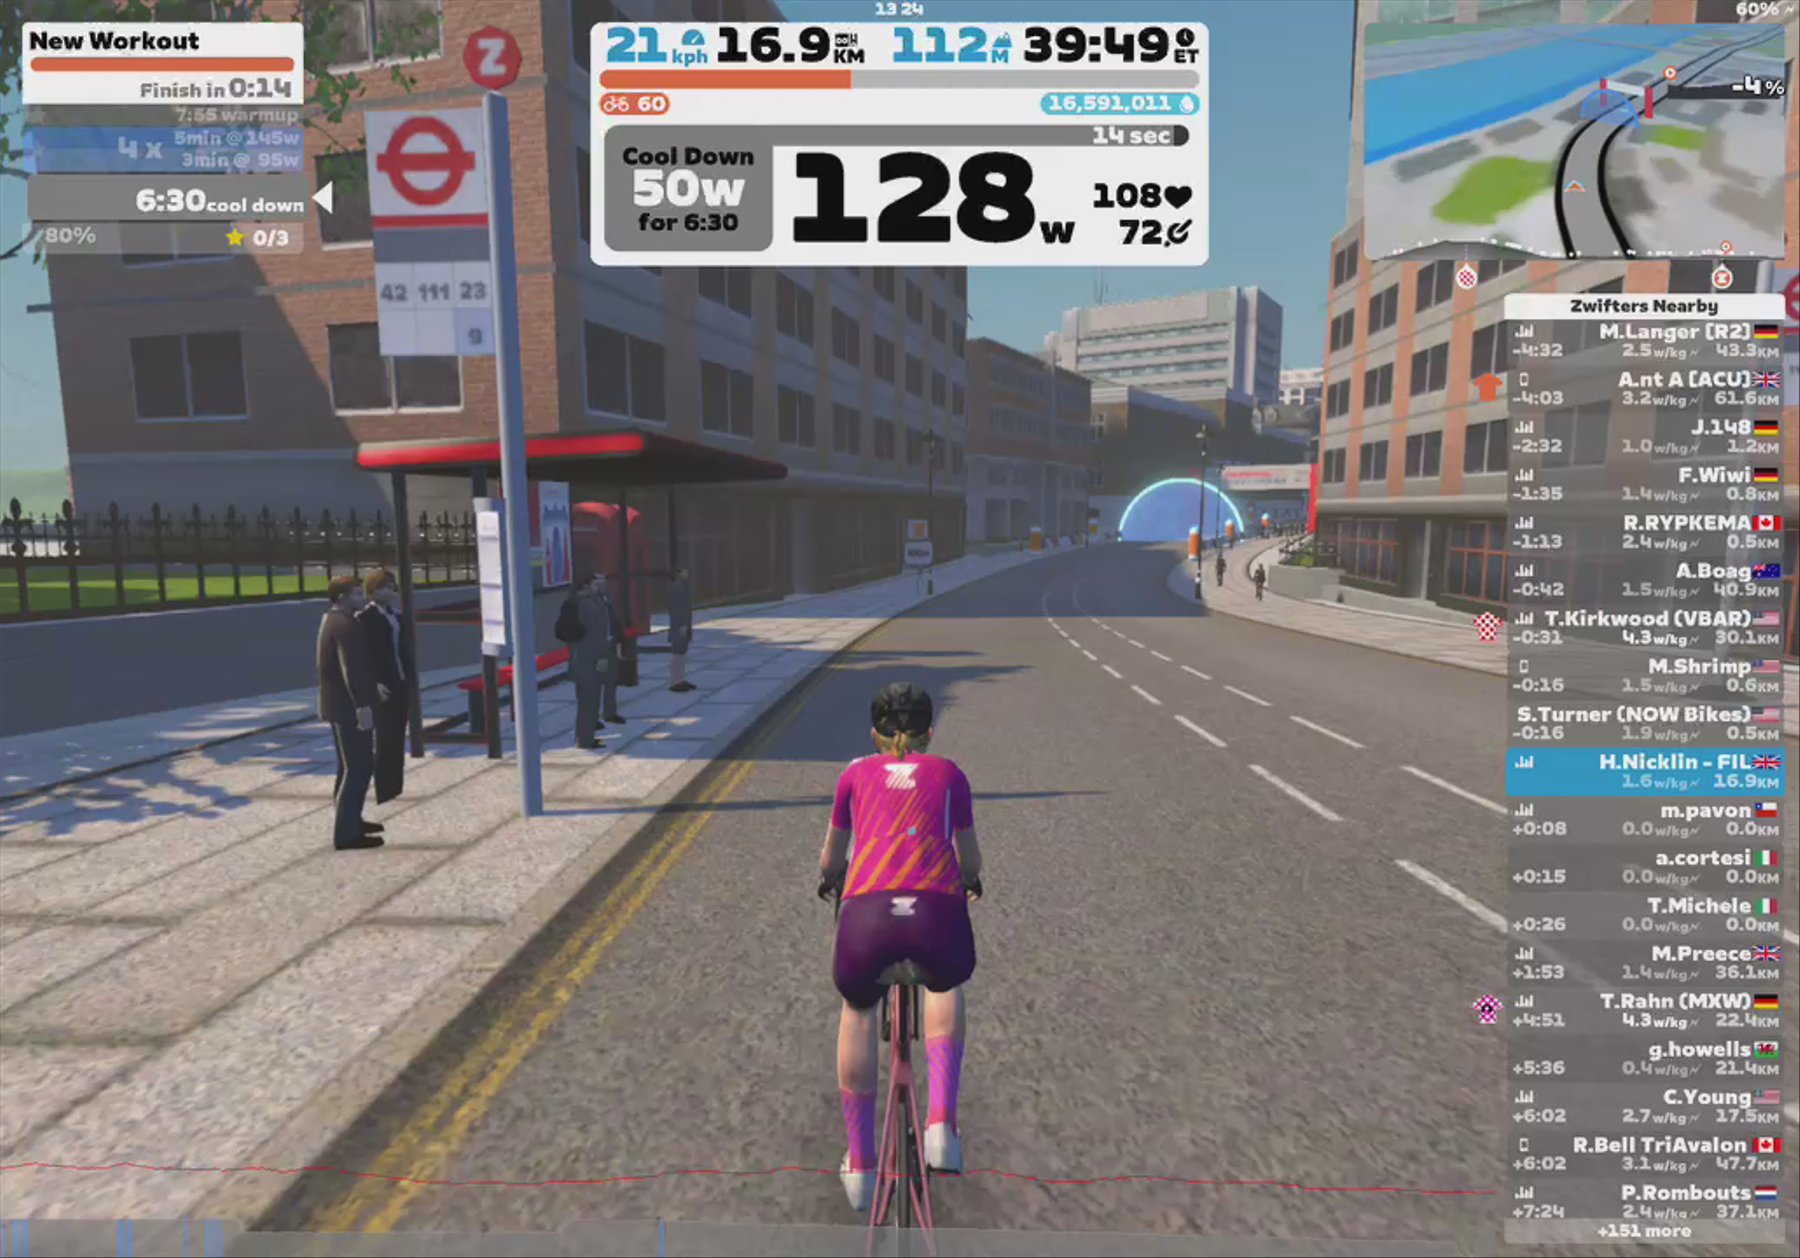 Zwift - New Workout in London